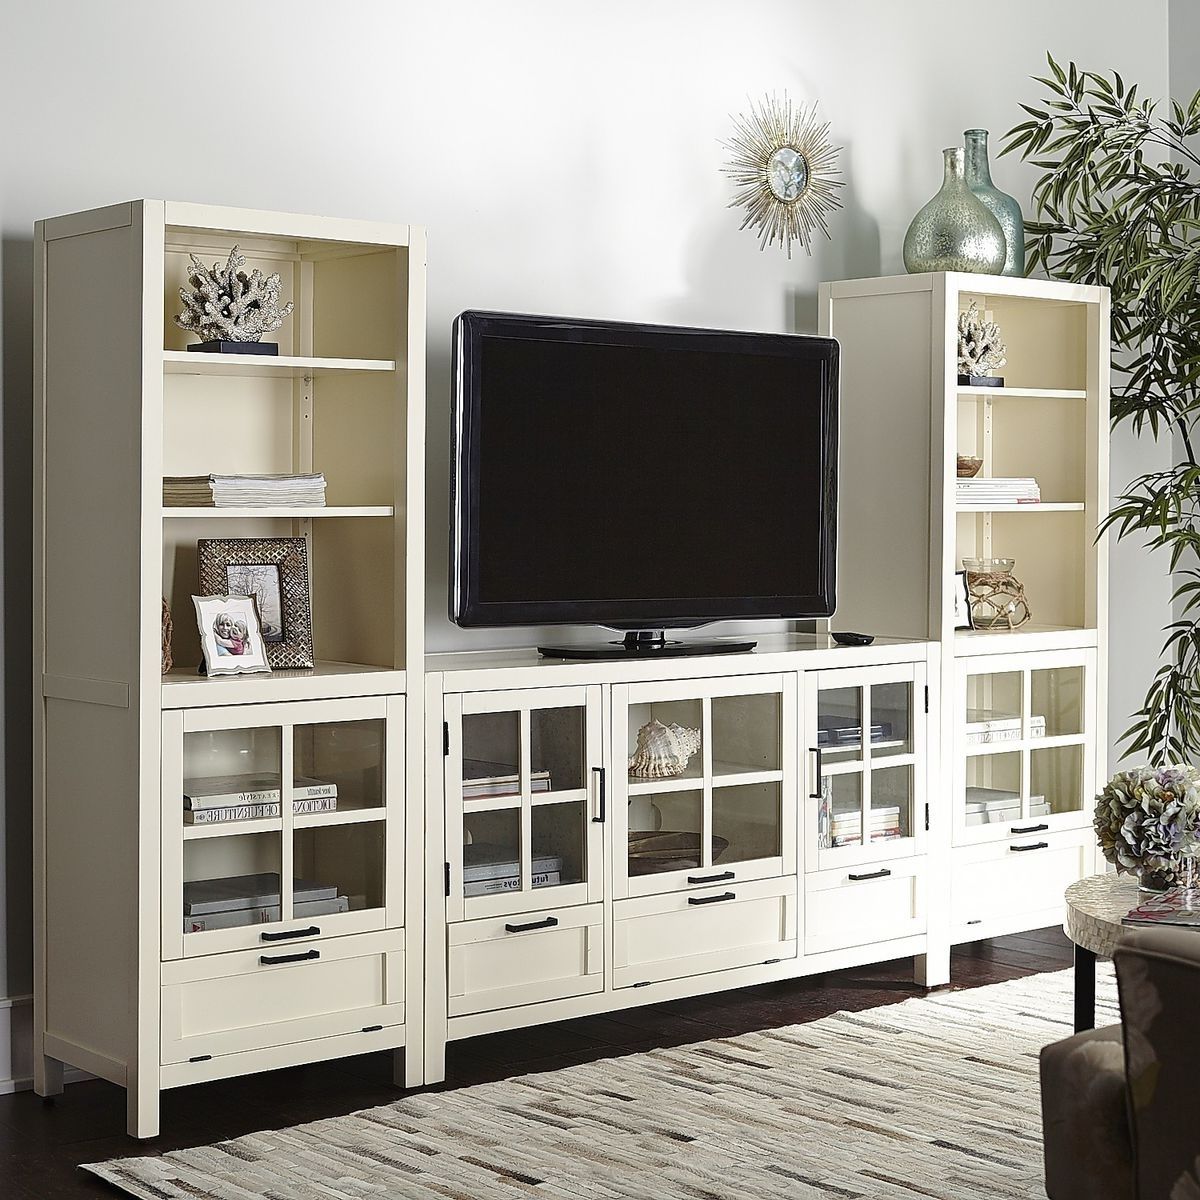 Tv Stand Bookcases Intended For Preferred Sausalito Bookcase & Media Tower – Antique White (View 15 of 15)